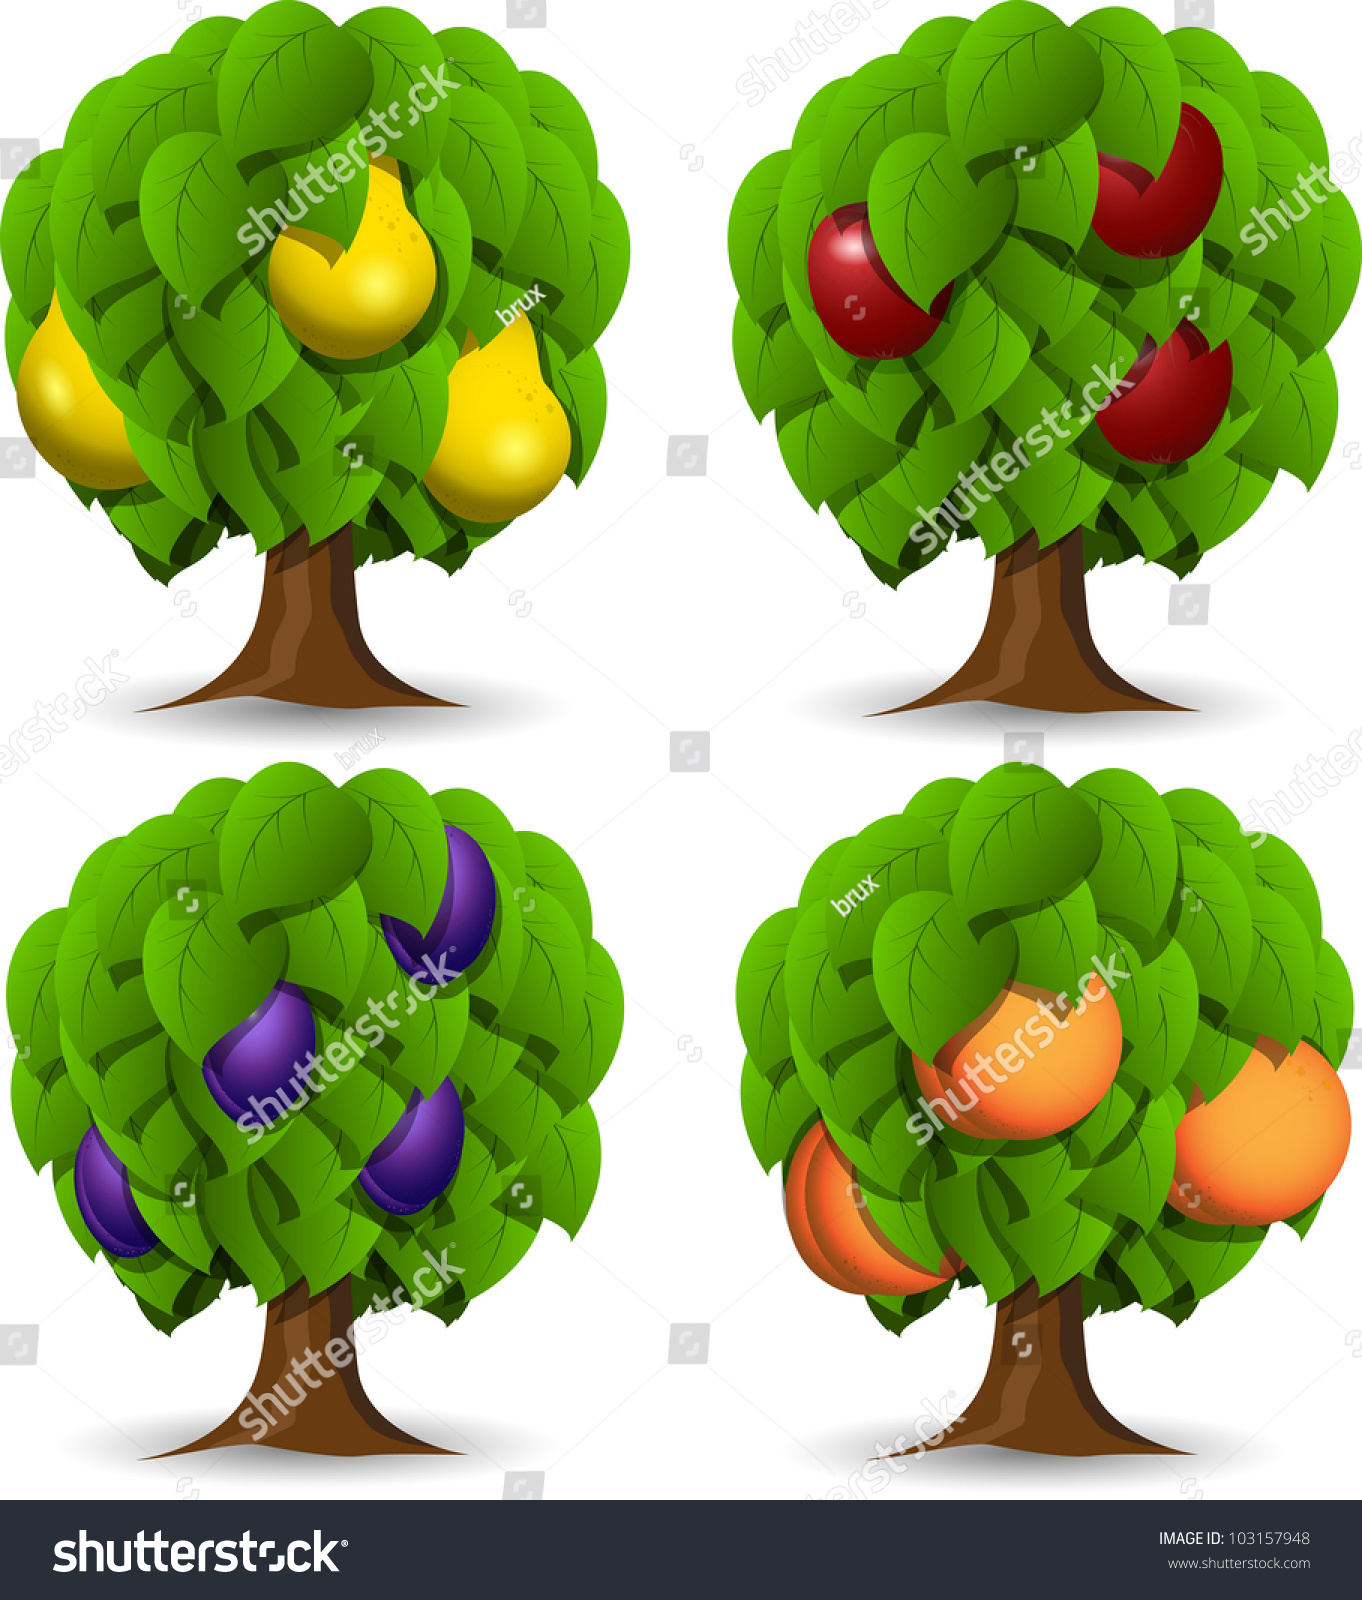 free clipart of fruit trees - photo #45